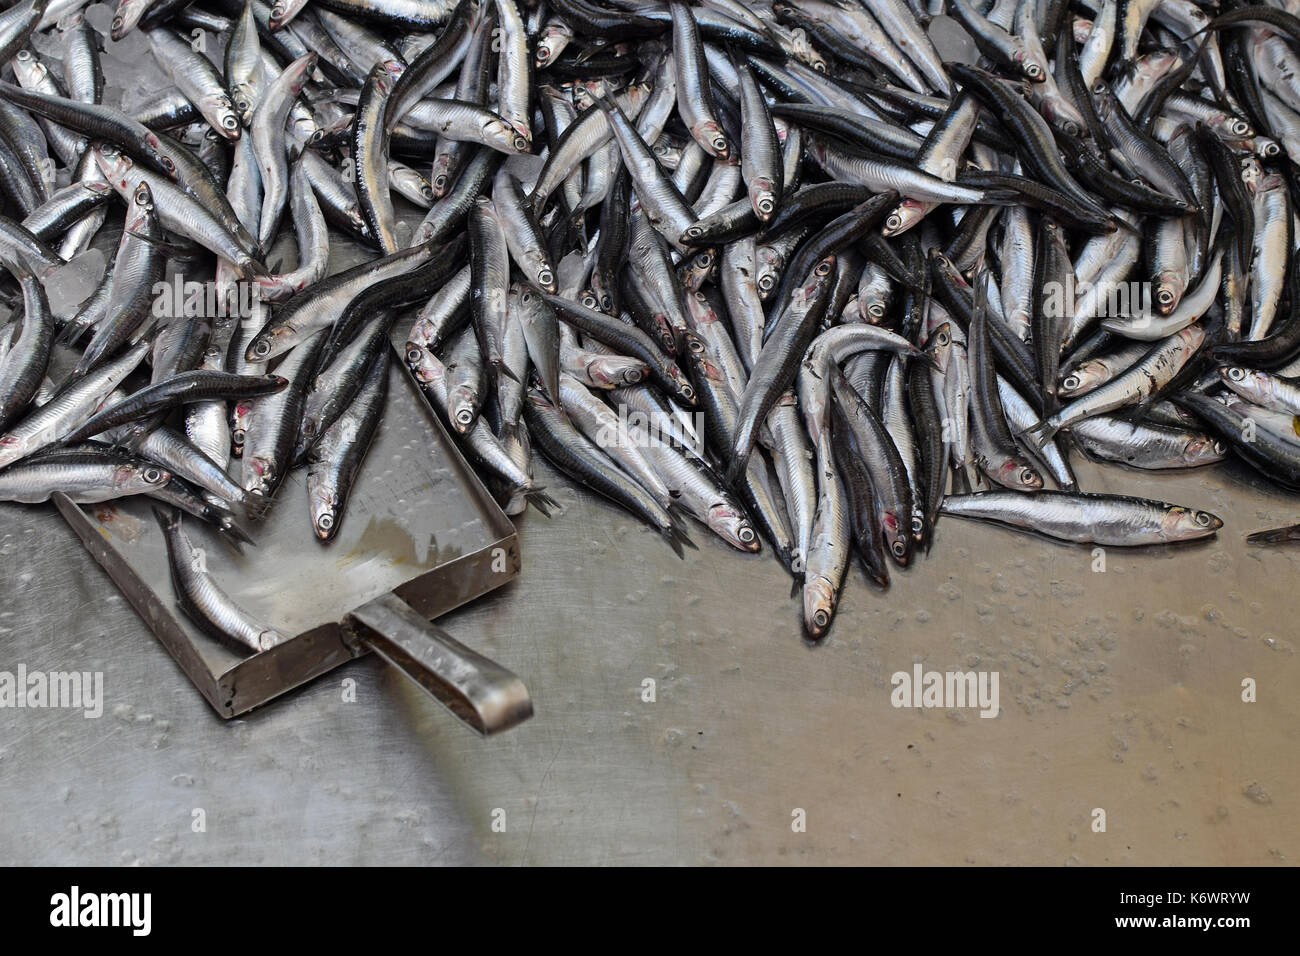 Fresh anchovies for sale on fish market stall with ice. Stock Photo